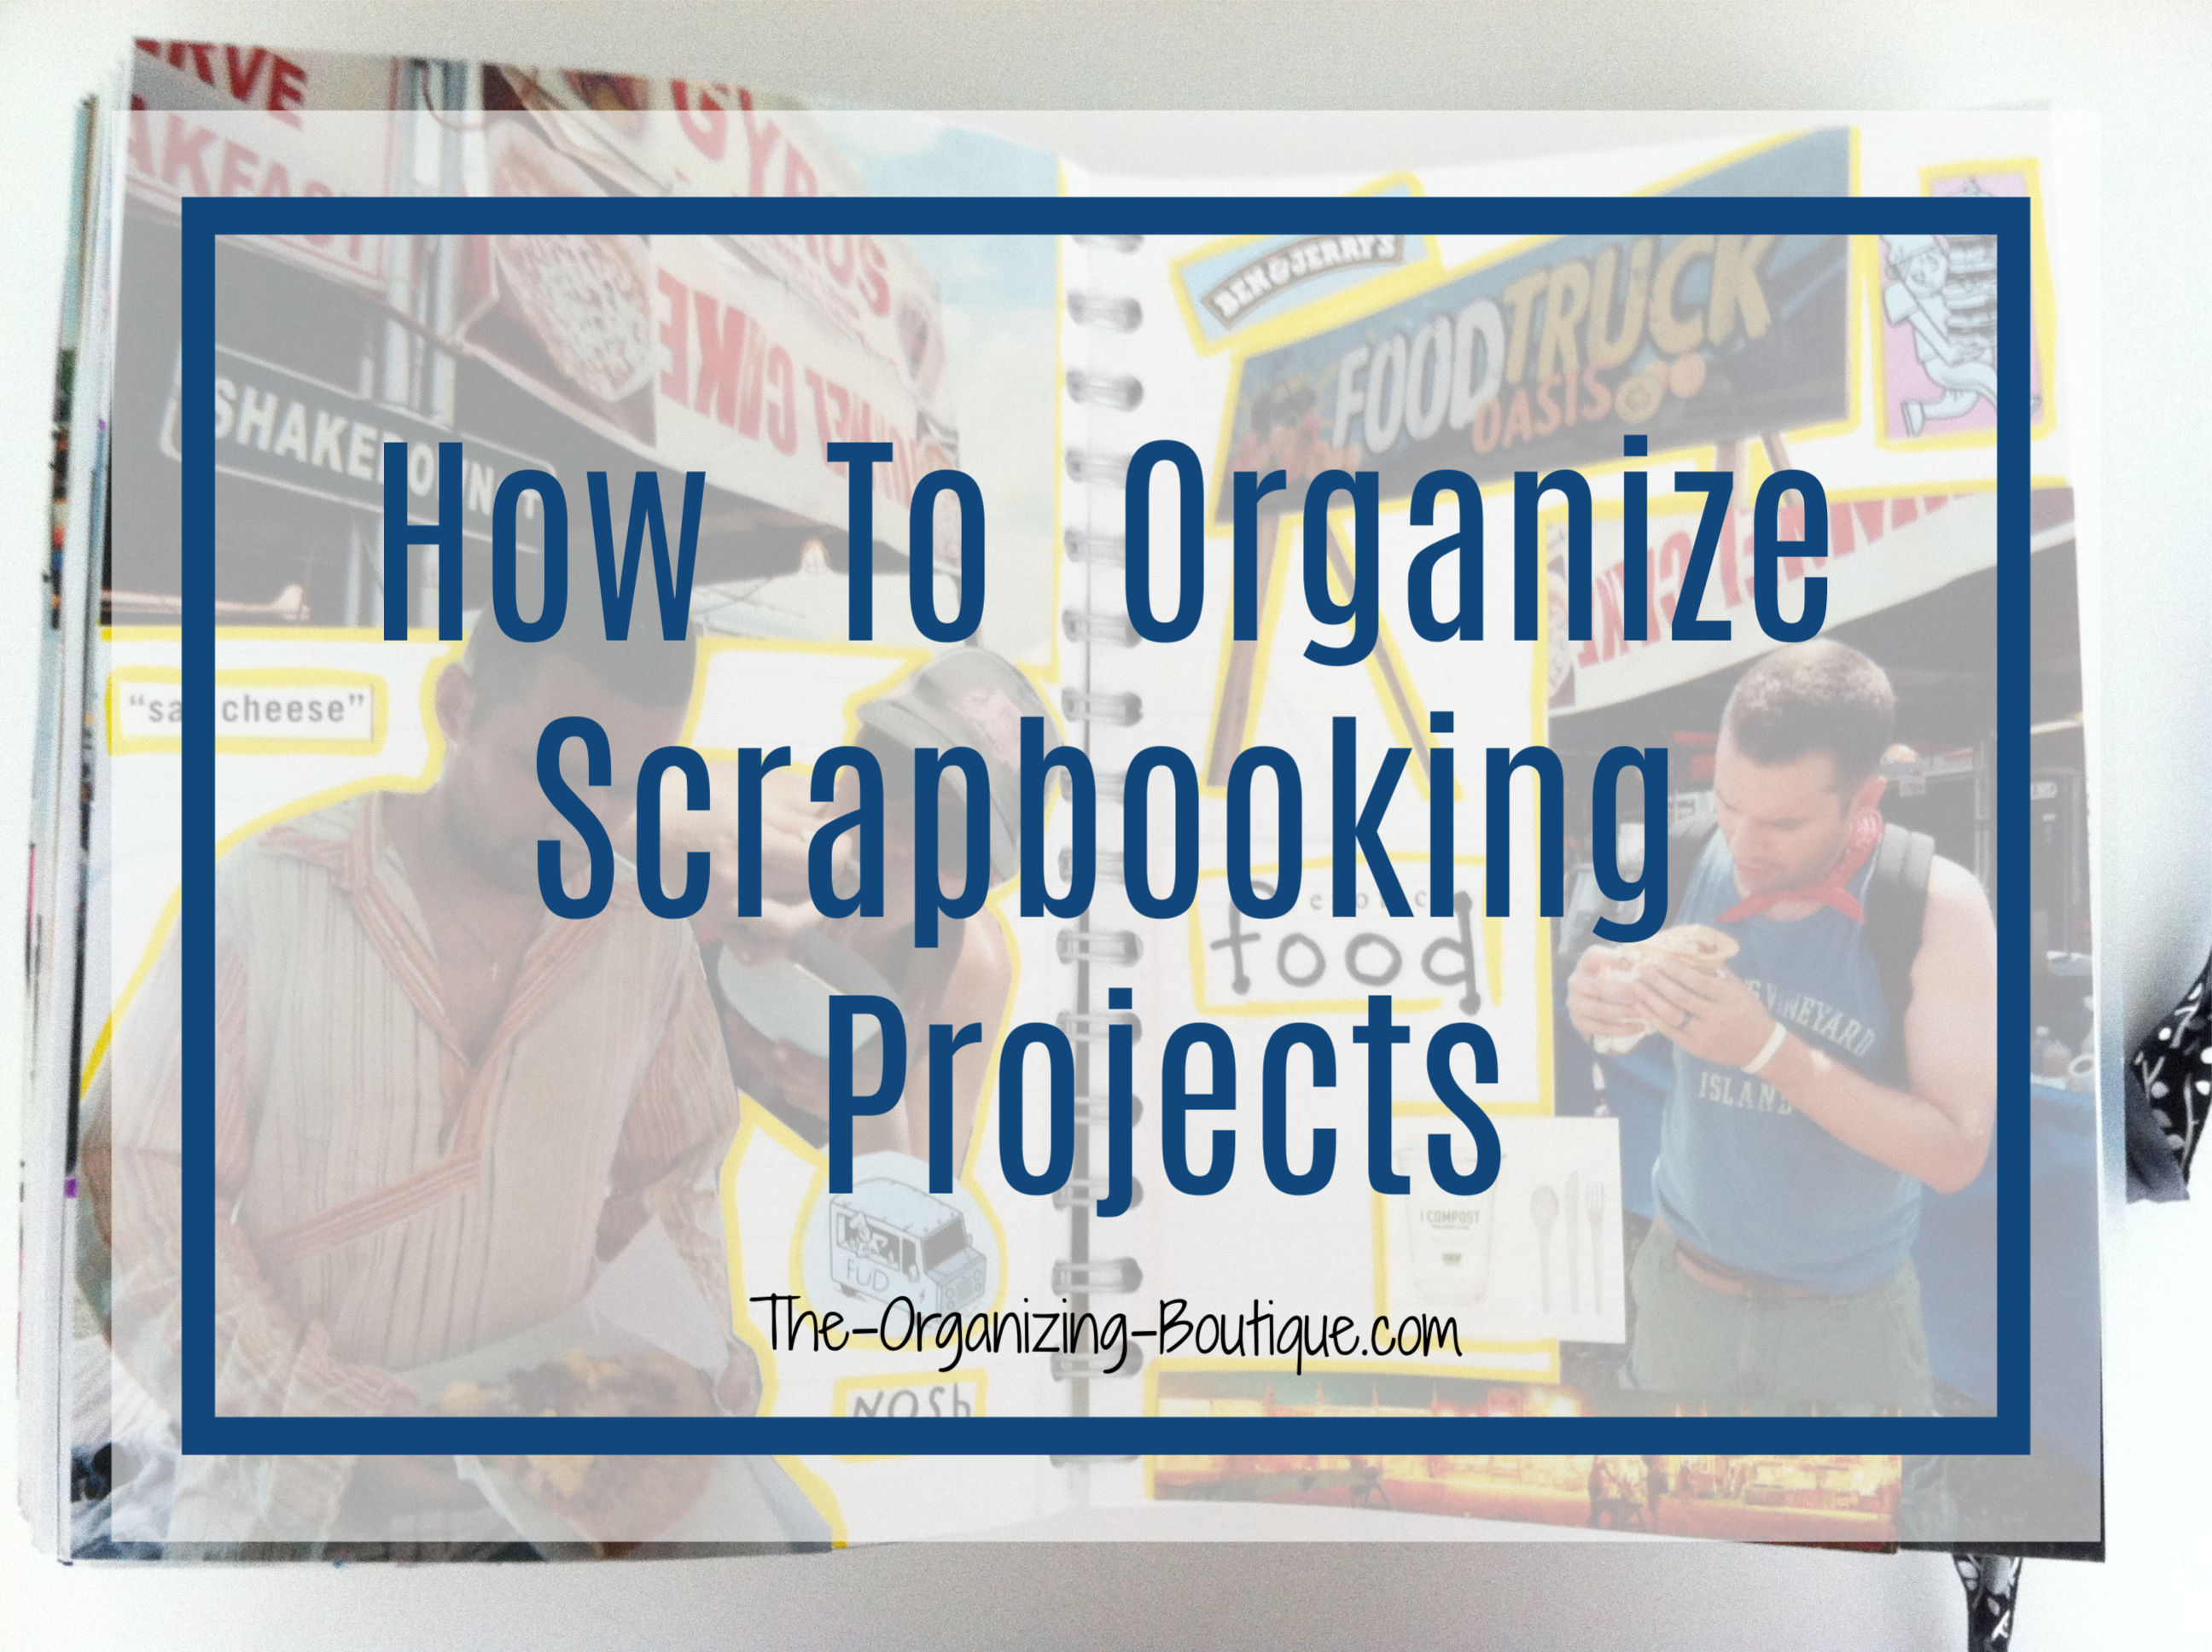 Looking for tips on how to scrapbook and how to organize scrapbooking projects? Here's how to put together a rockin' scrapbook!